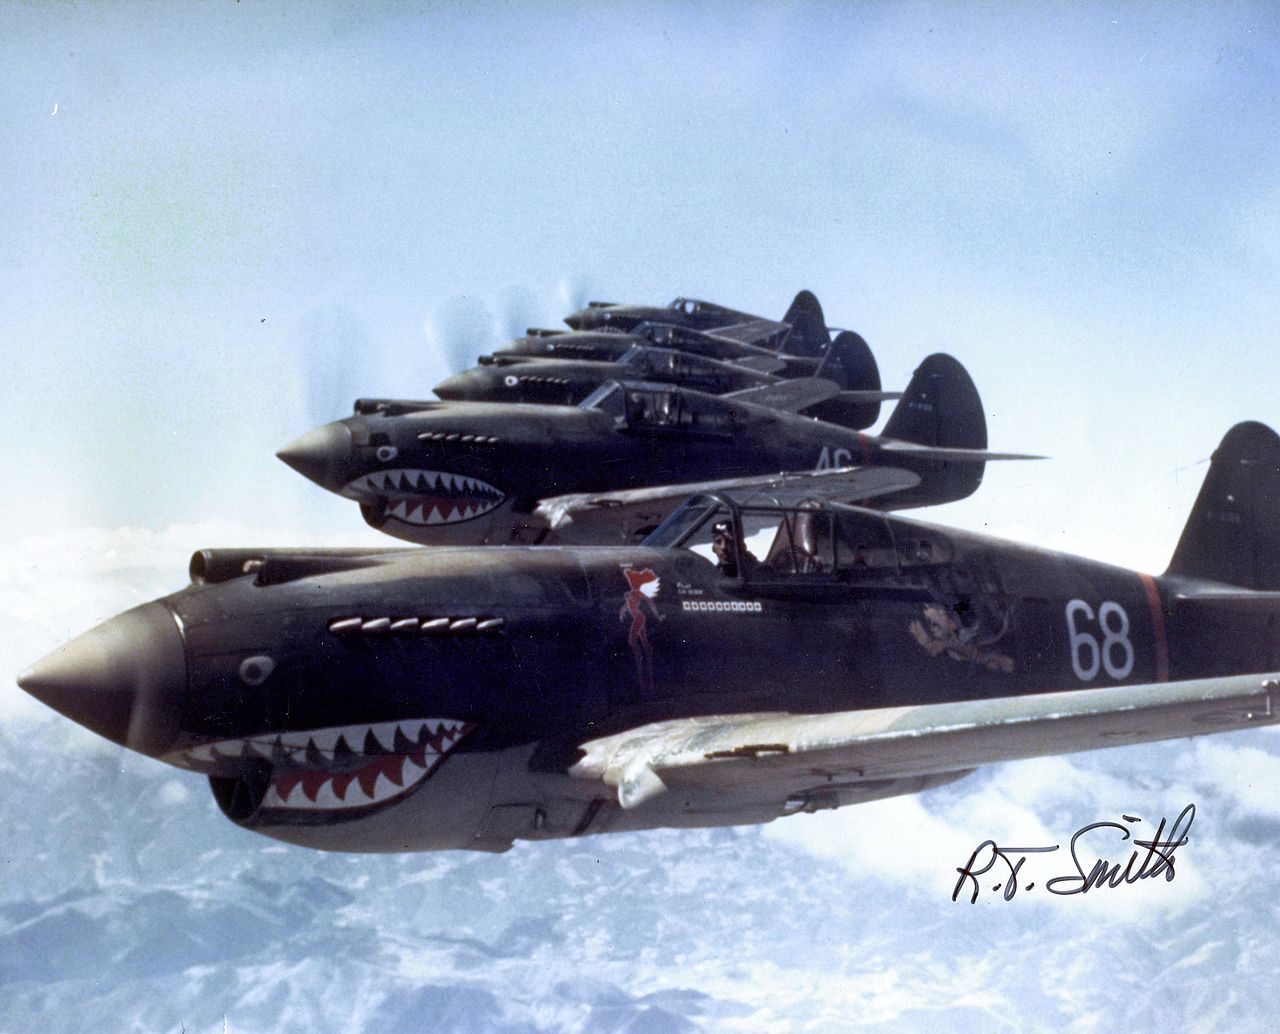 3rd Squadron Hell's Angels Flying Tigers, 1942, San Diego Air & Space Museum Archive (this group later formed the famous motorcycle gang of the same name)